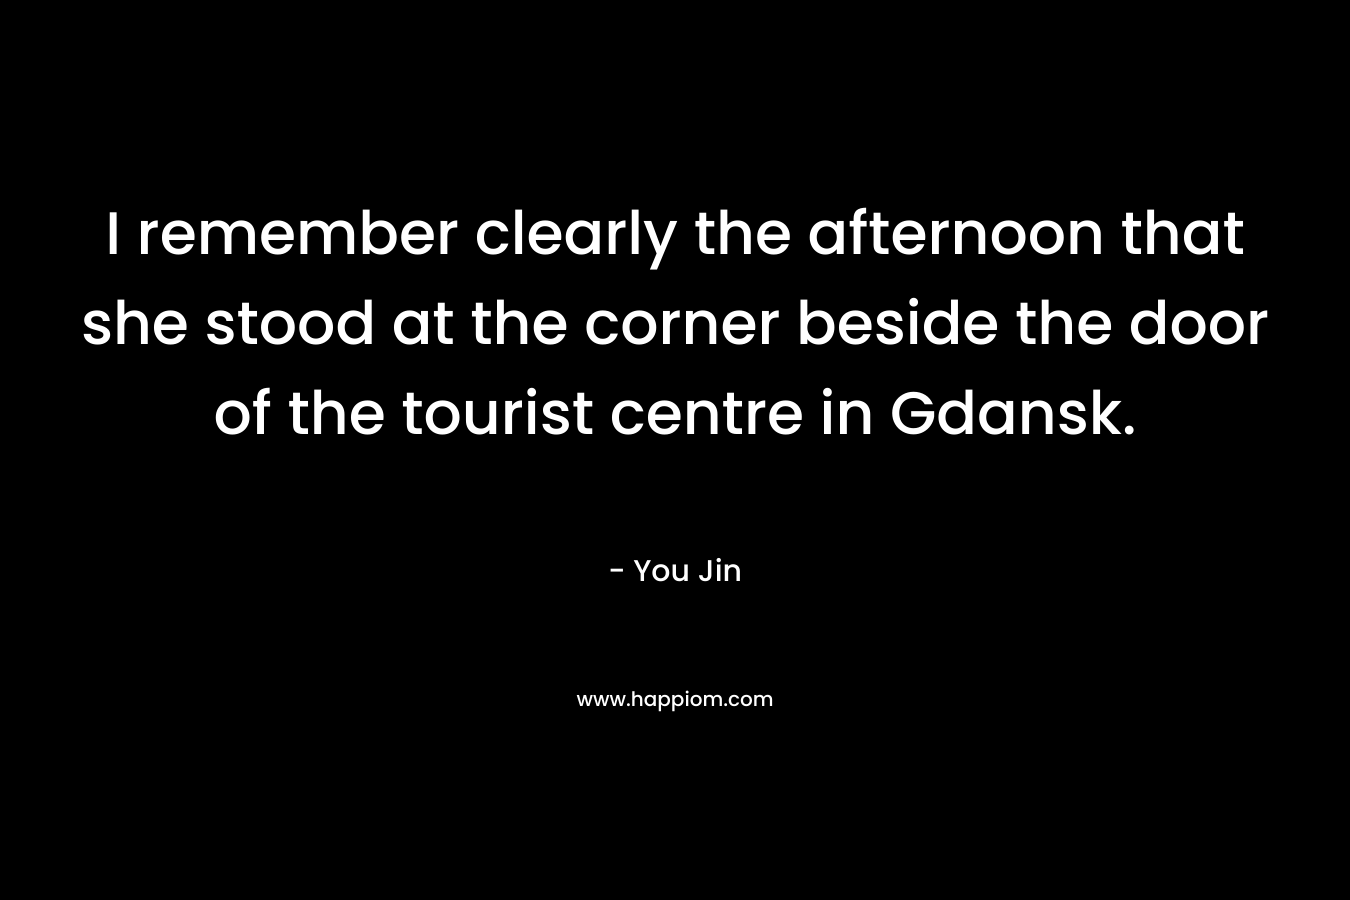 I remember clearly the afternoon that she stood at the corner beside the door of the tourist centre in Gdansk. – You Jin